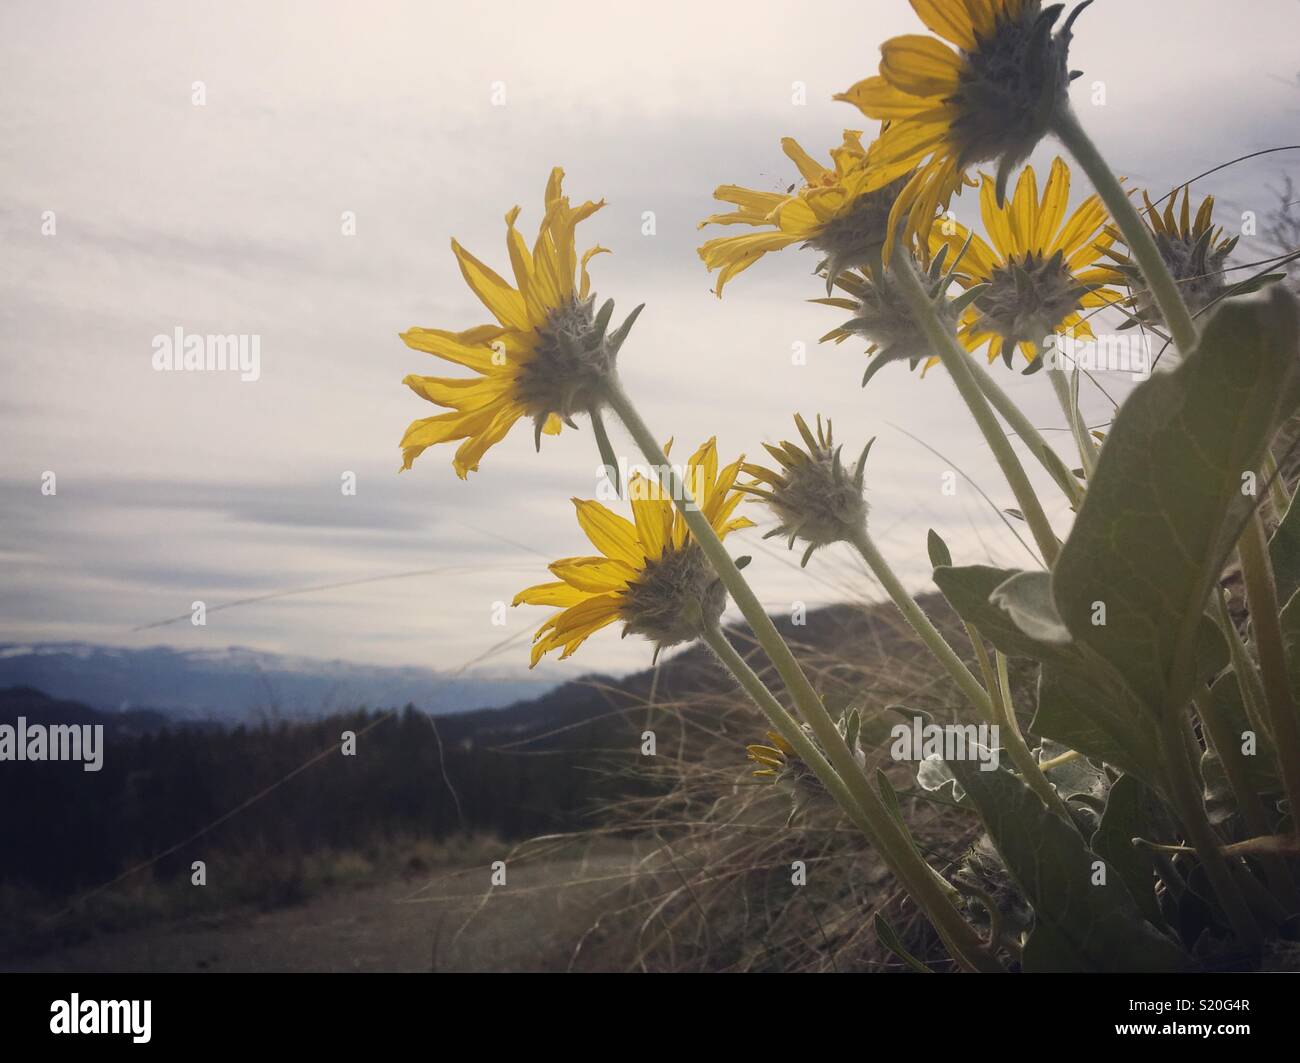 Yellow spring sunflowers, Arrowleaf Balsam Root, on an overcast spring day with mountains in the background. Room for copy. Stock Photo